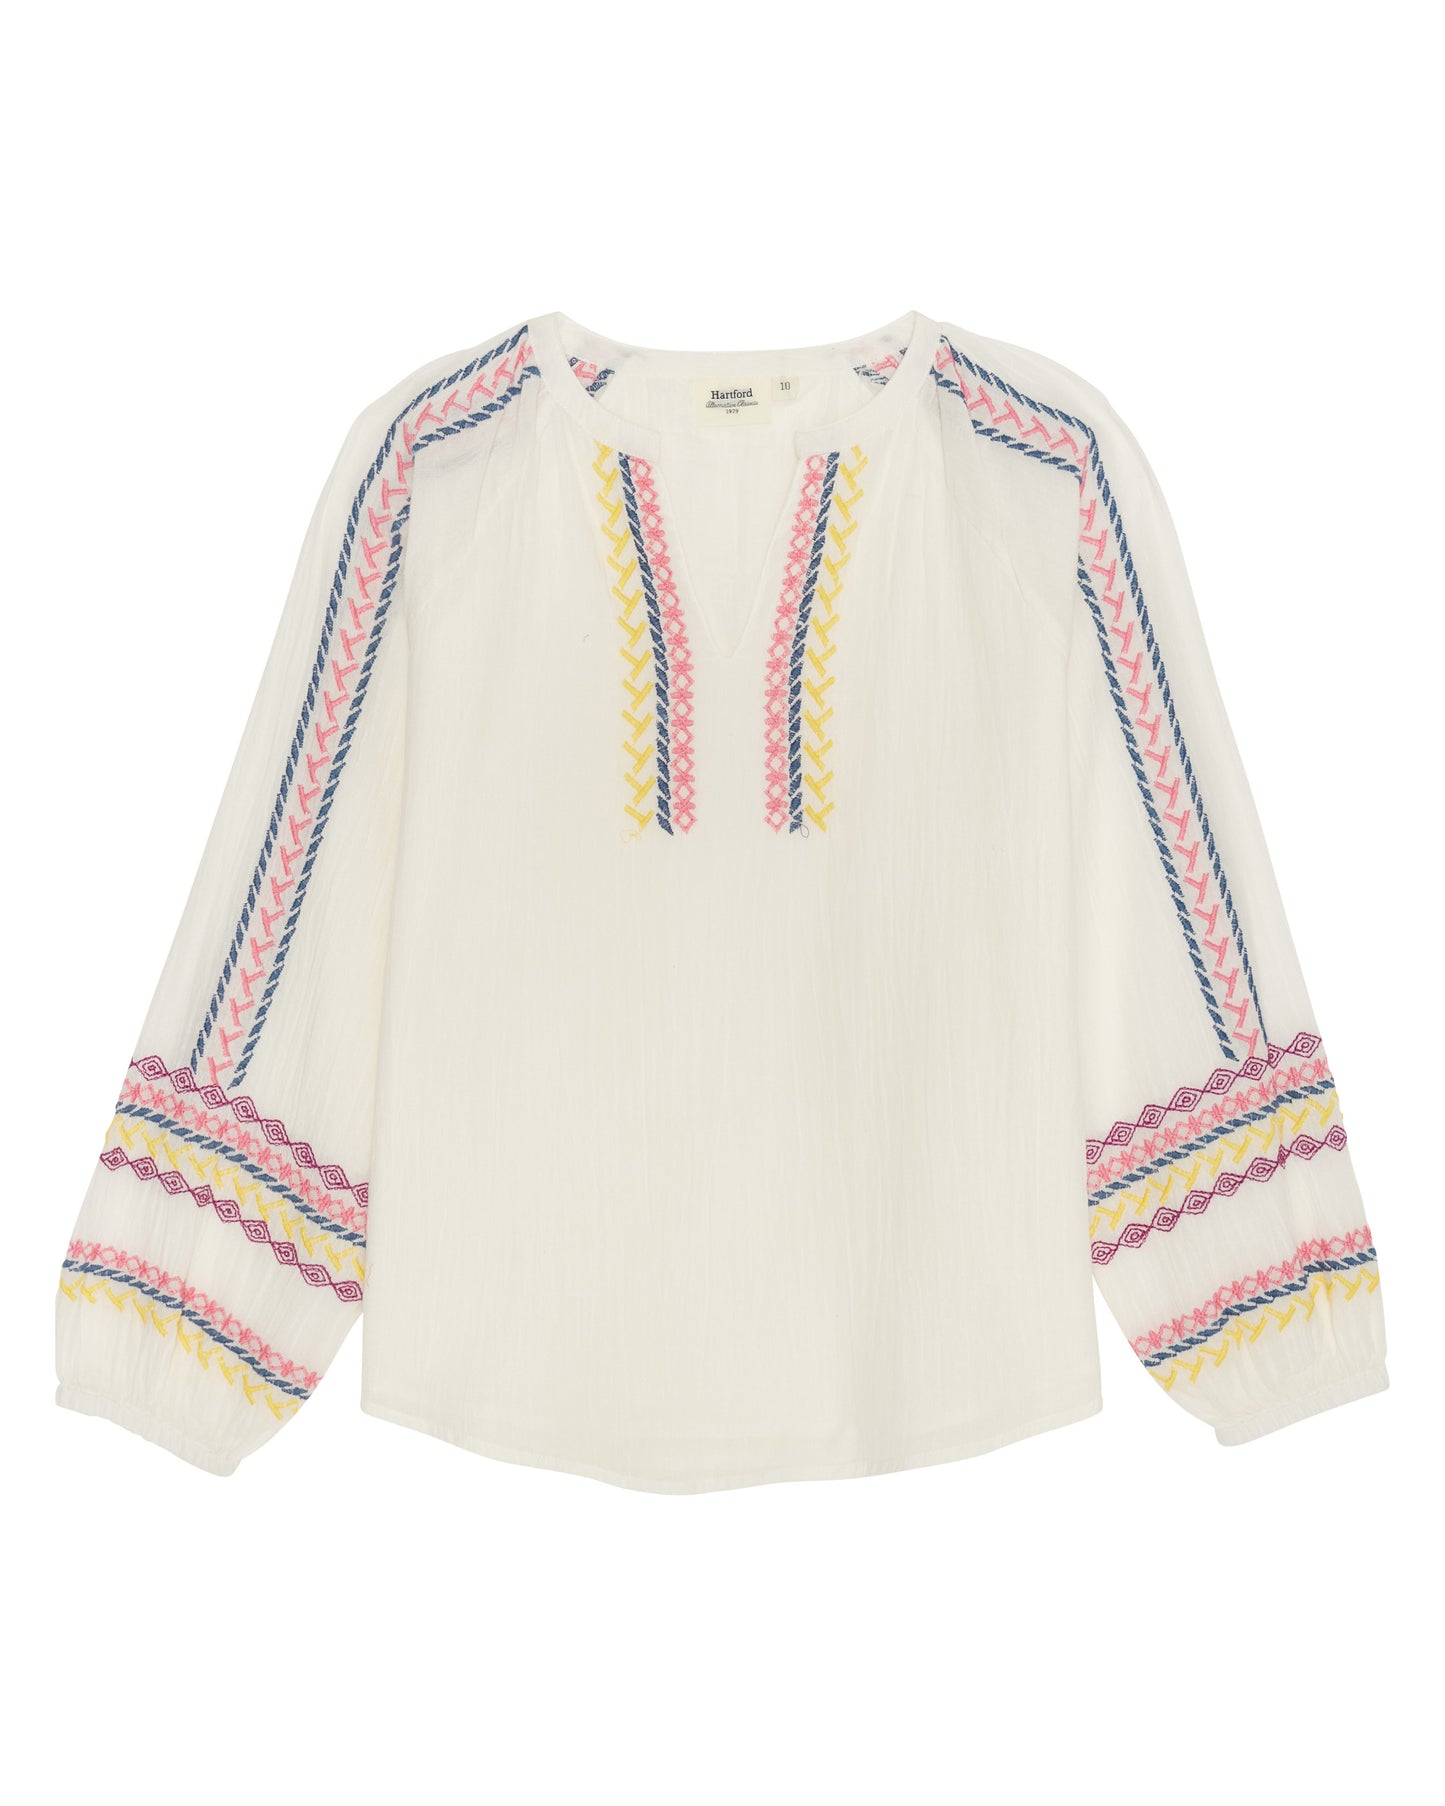 Hirman Girls' Off-white & Multicolor Embroidered Cotton Top